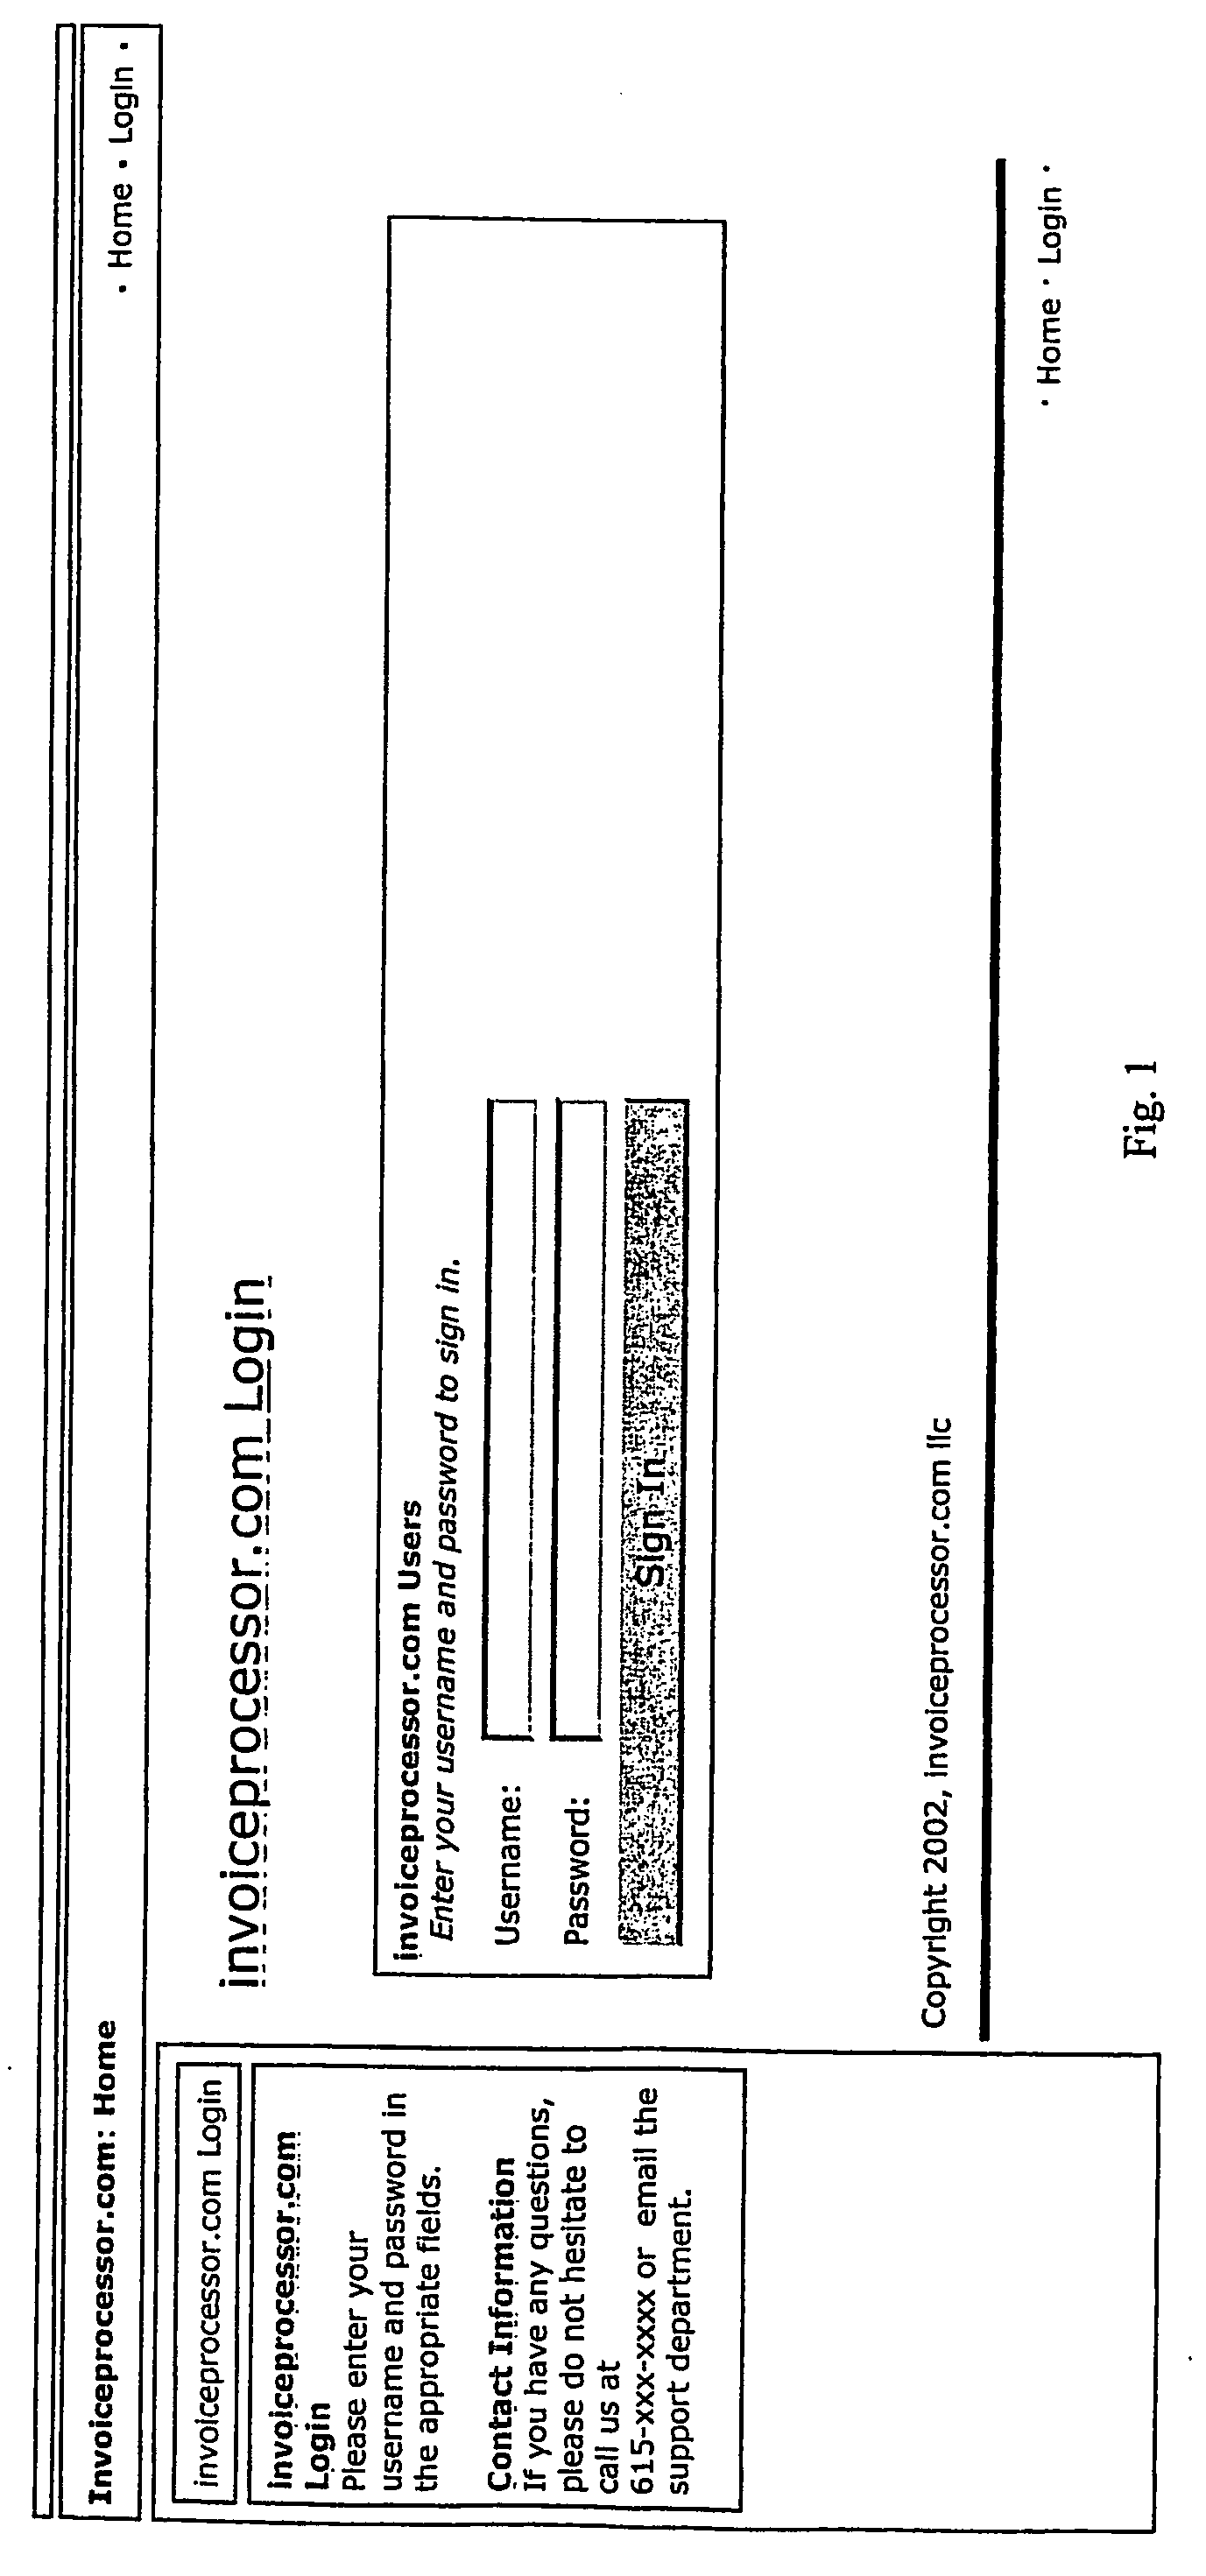 System and method for processing professional service invoices